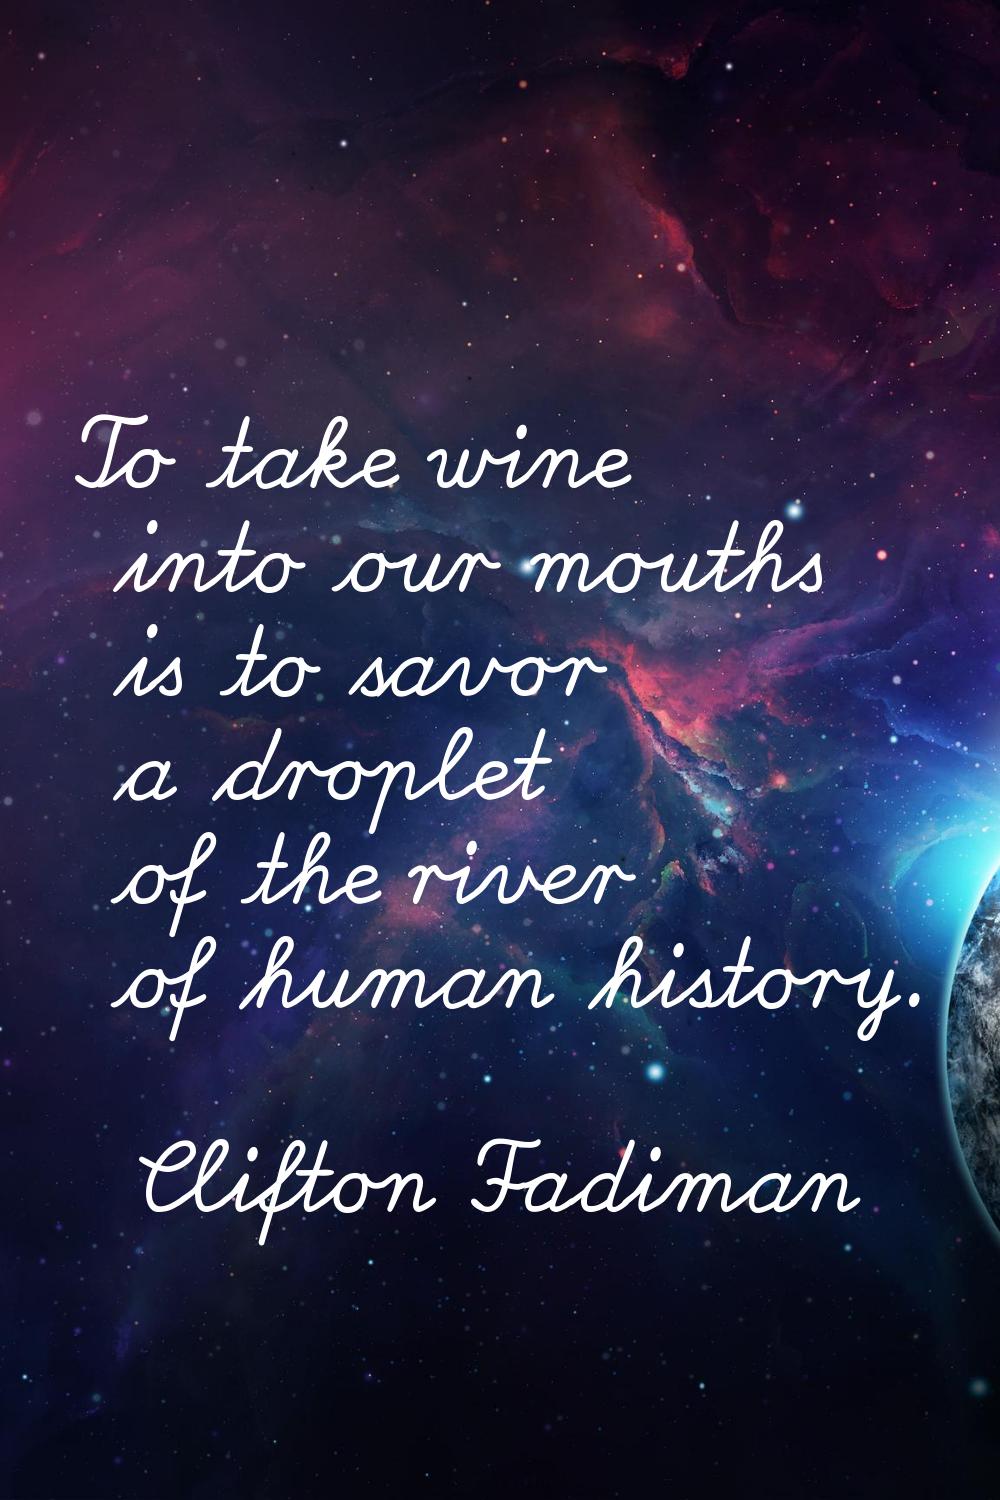 To take wine into our mouths is to savor a droplet of the river of human history.